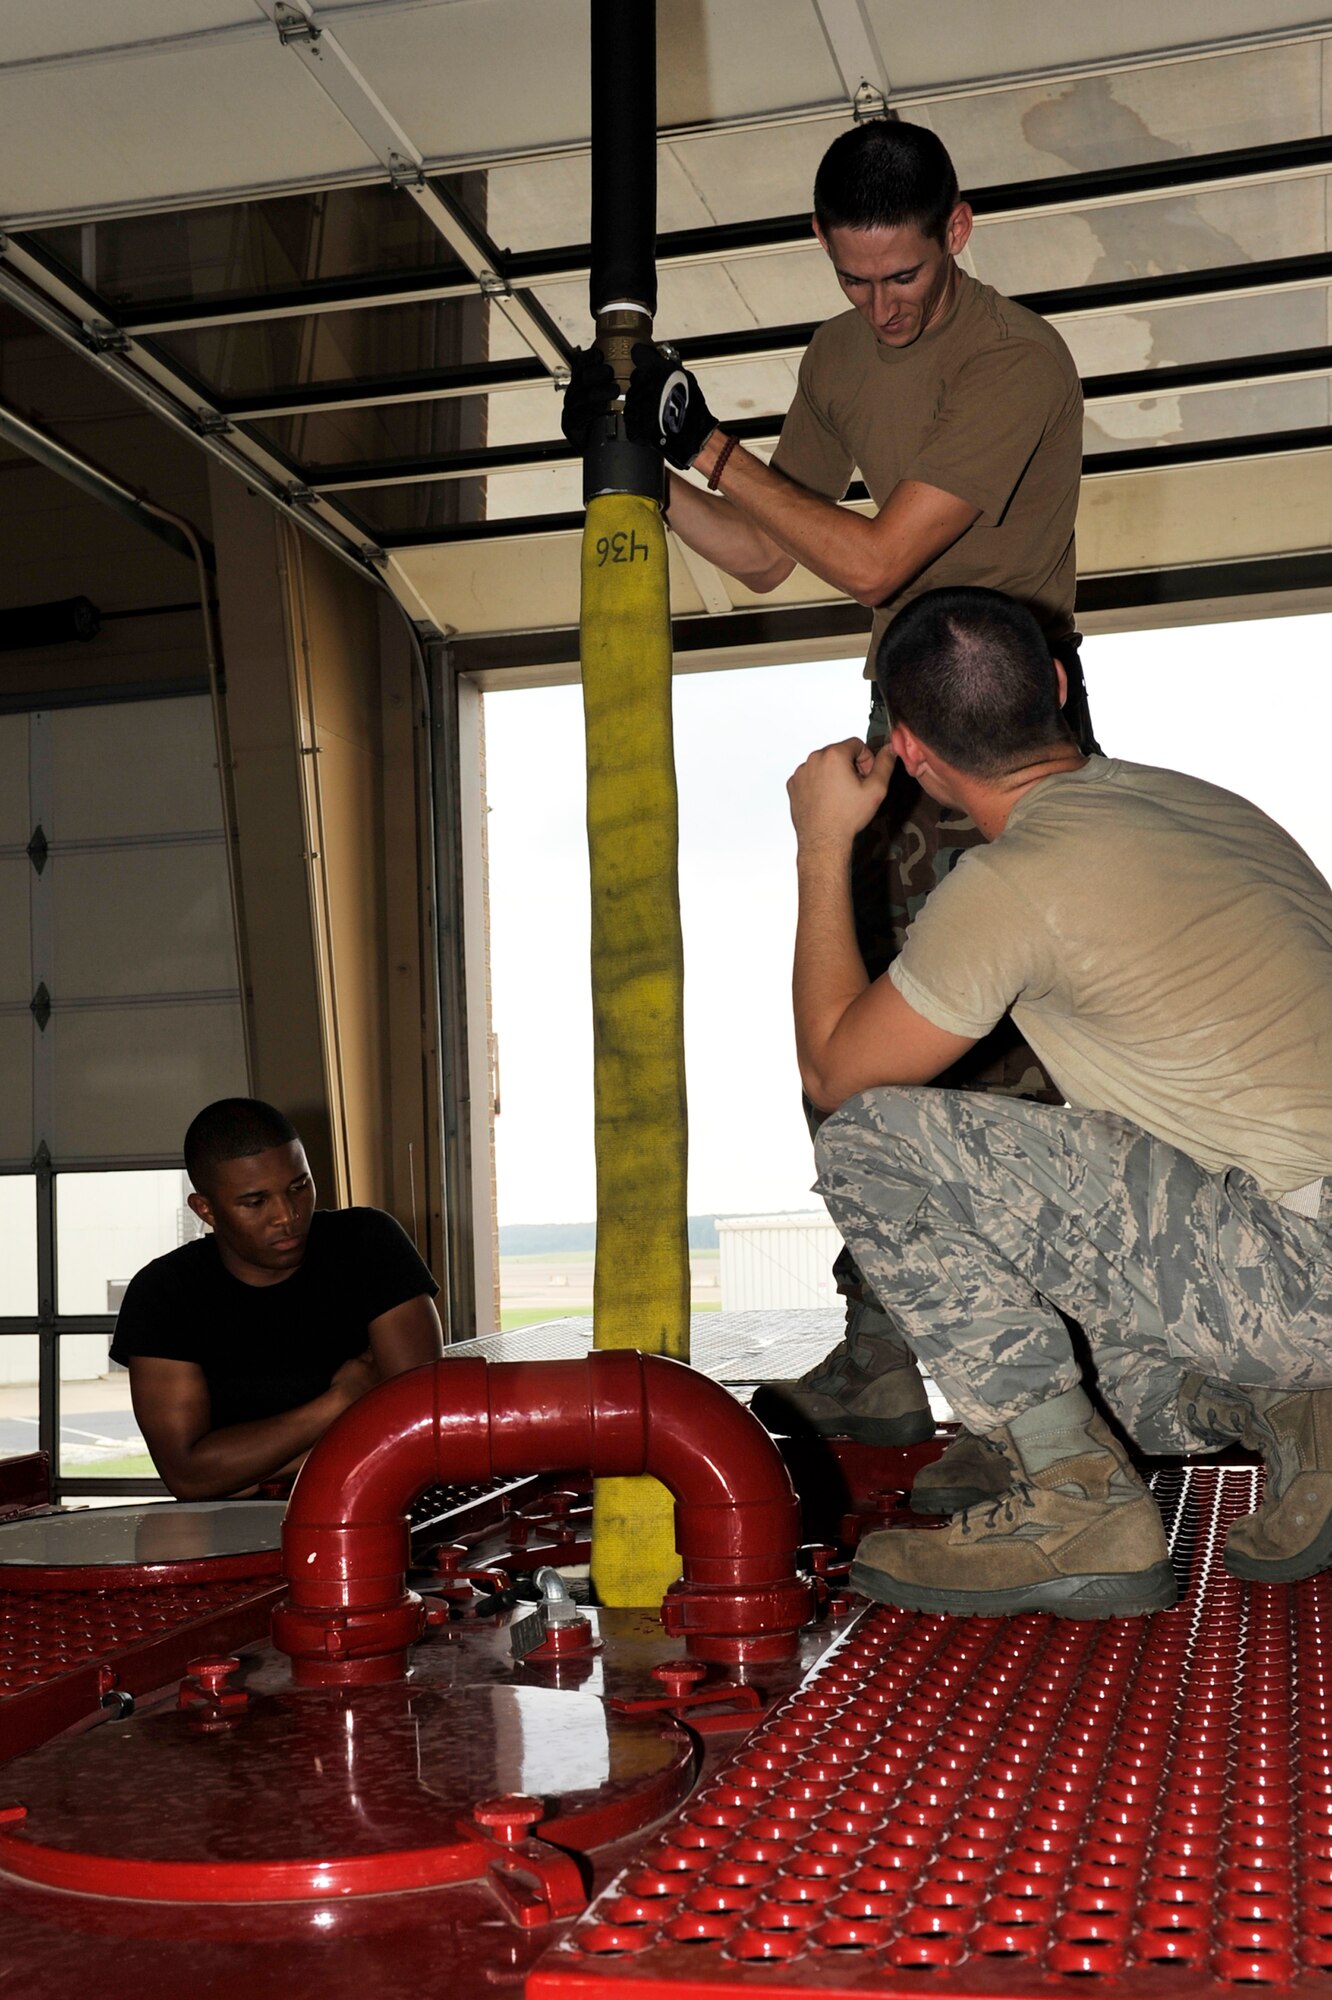 From left, Airman Curtis Sinkfield, Staff Sgt. Robert Starkey, and Airman Daniel O'Conner, 19th Civil Engineering Squadron fire fighters, use an overhead water fill to refill a fire truck on base Sept 21. The P19 crash truck can hold up to 1,000 gallons of water. (U.S. Air Force photo by Airman 1st Class Lausanne Pacheco)